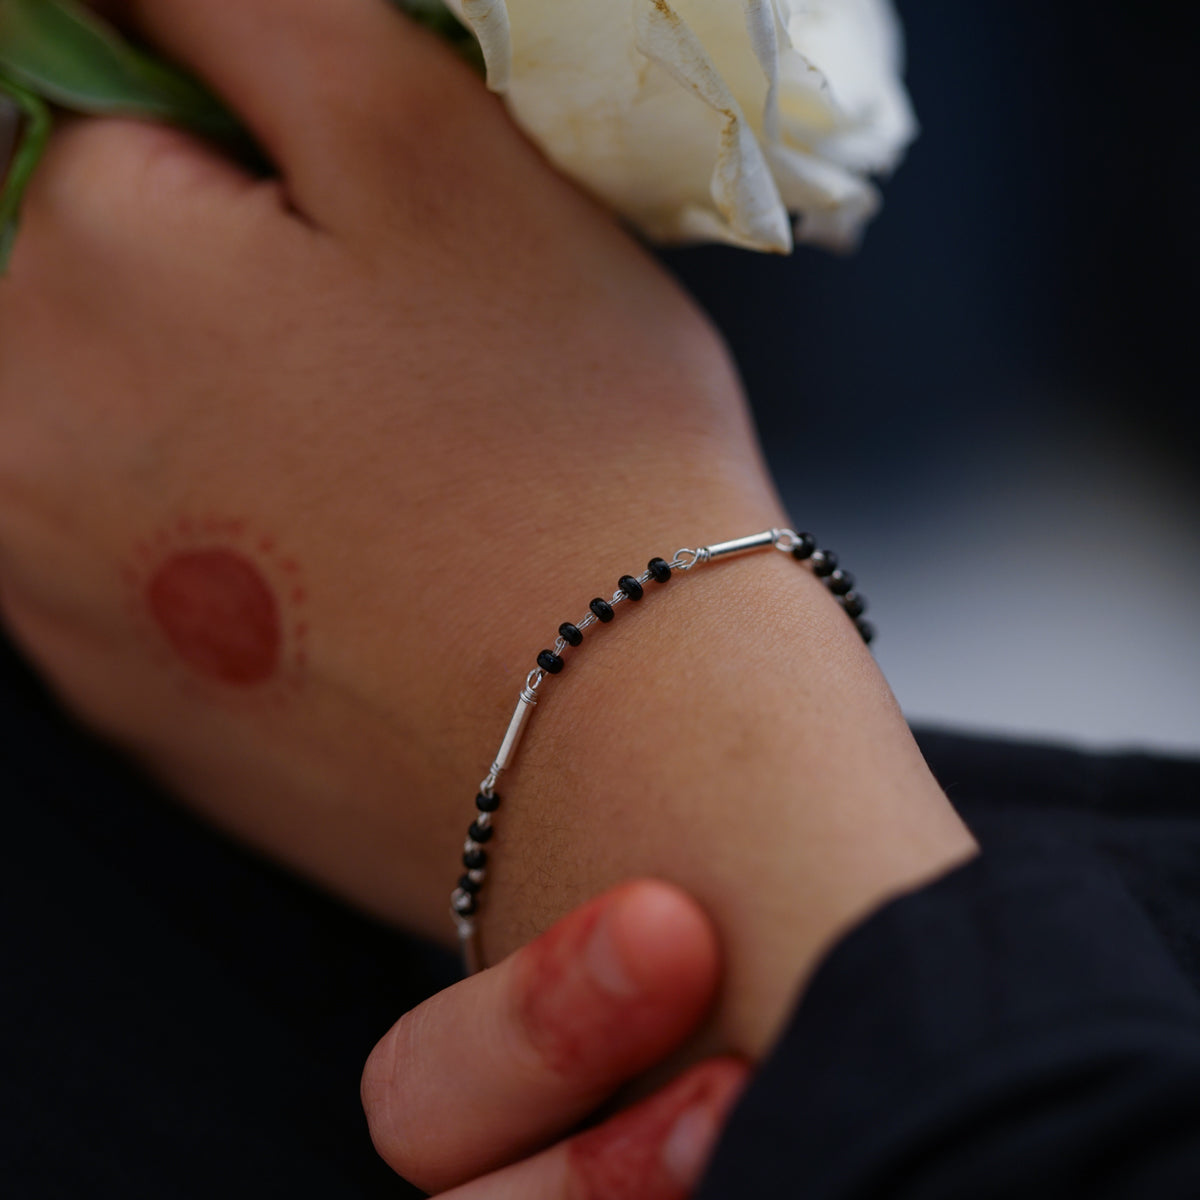 a close up of a person holding a flower